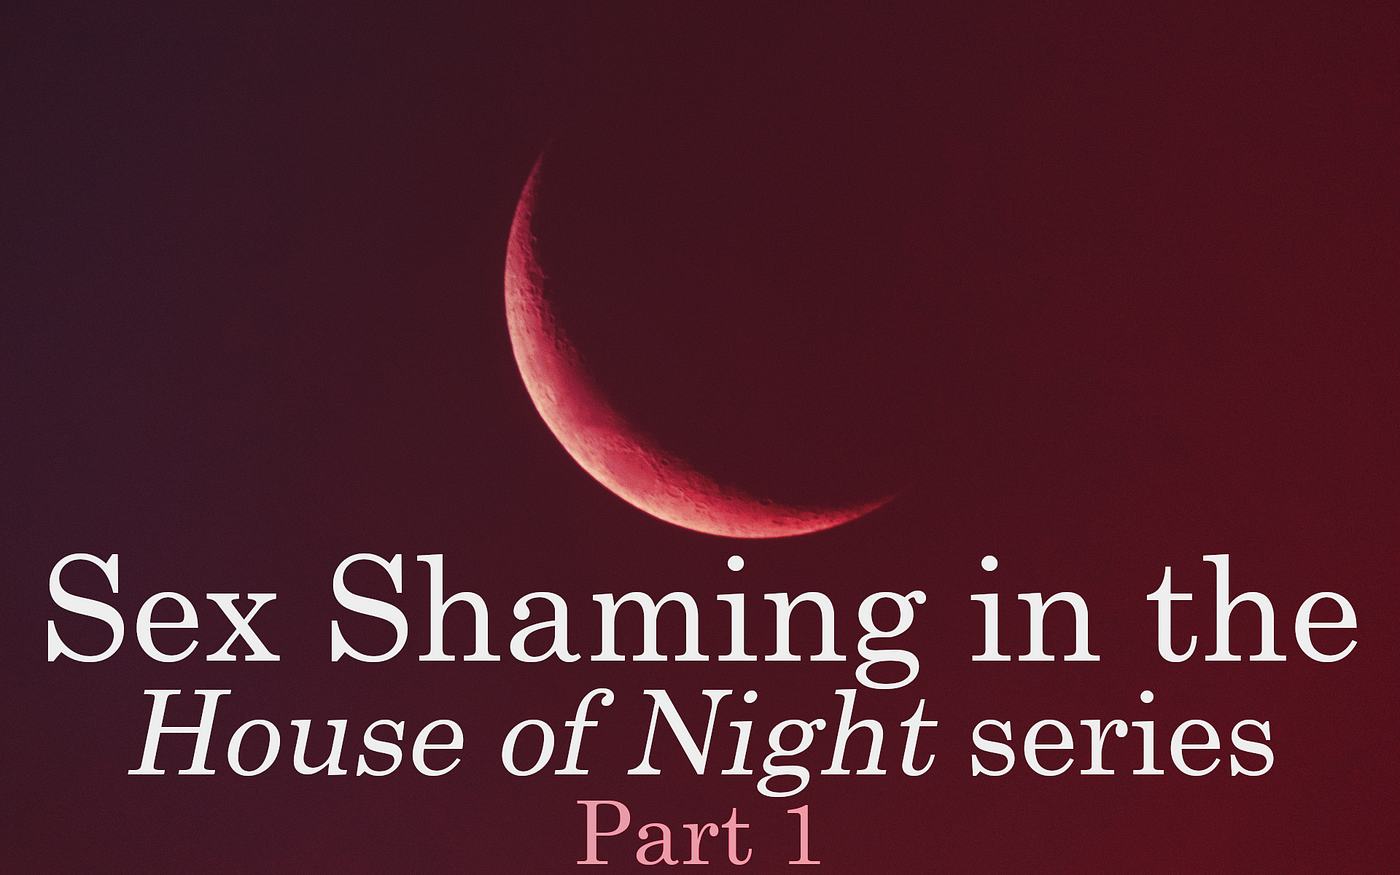 Part honey, part whore Sex Shaming and Internalized Misogyny in the House of Night Part 1 by Rachael Arsenault Medium